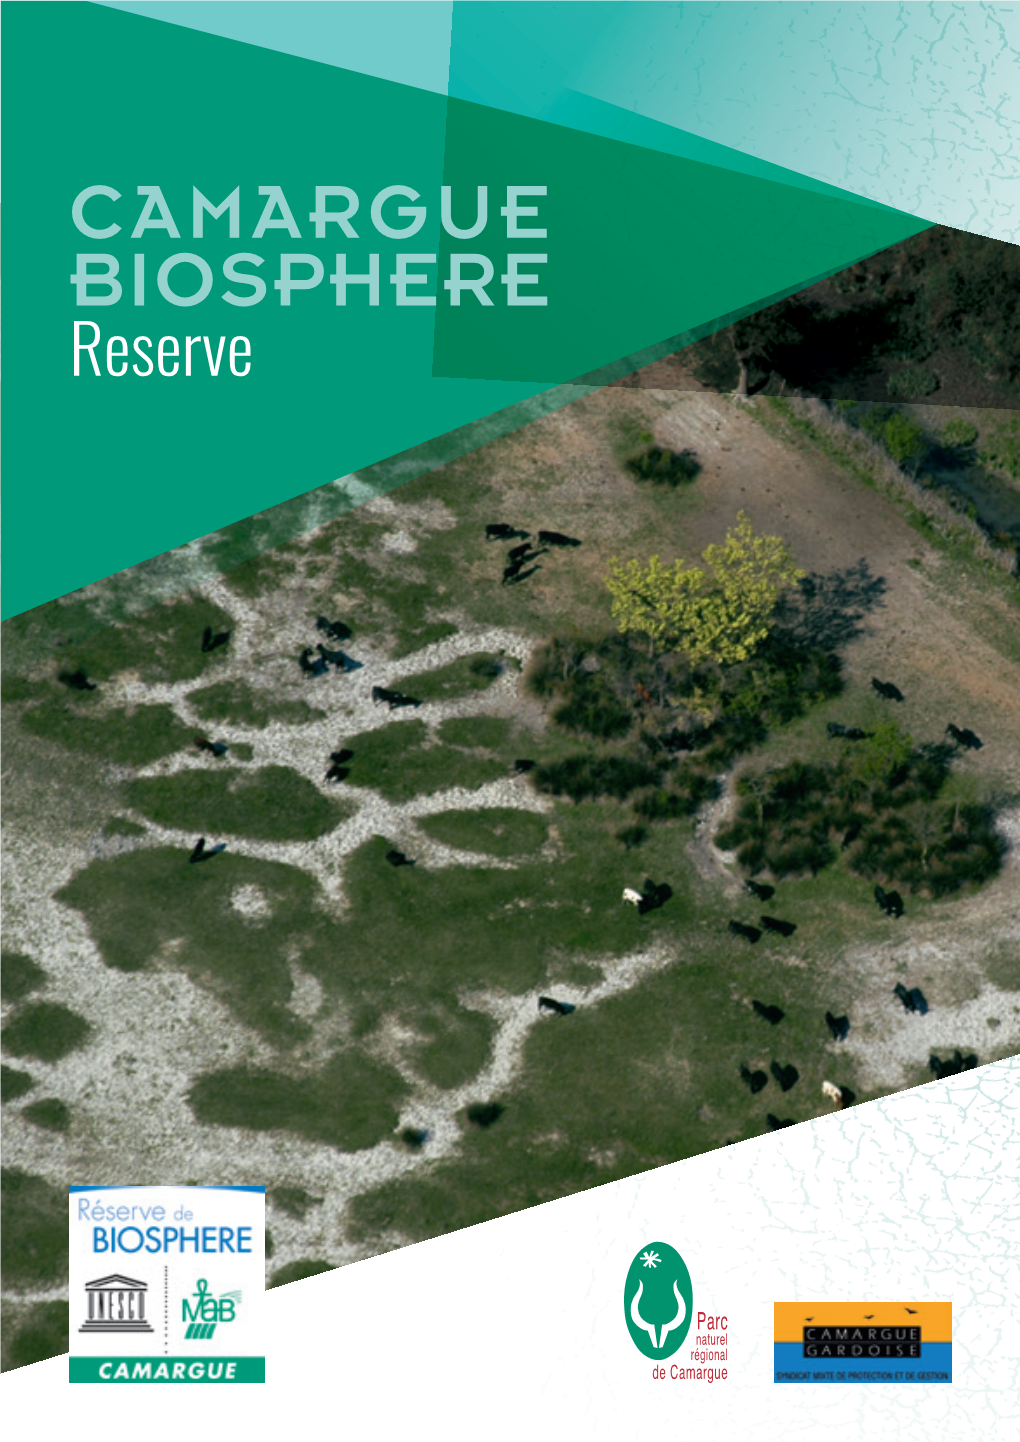 CAMARGUE BIOSPHERE Reserve WHAT IS a Biosphere Reserve?